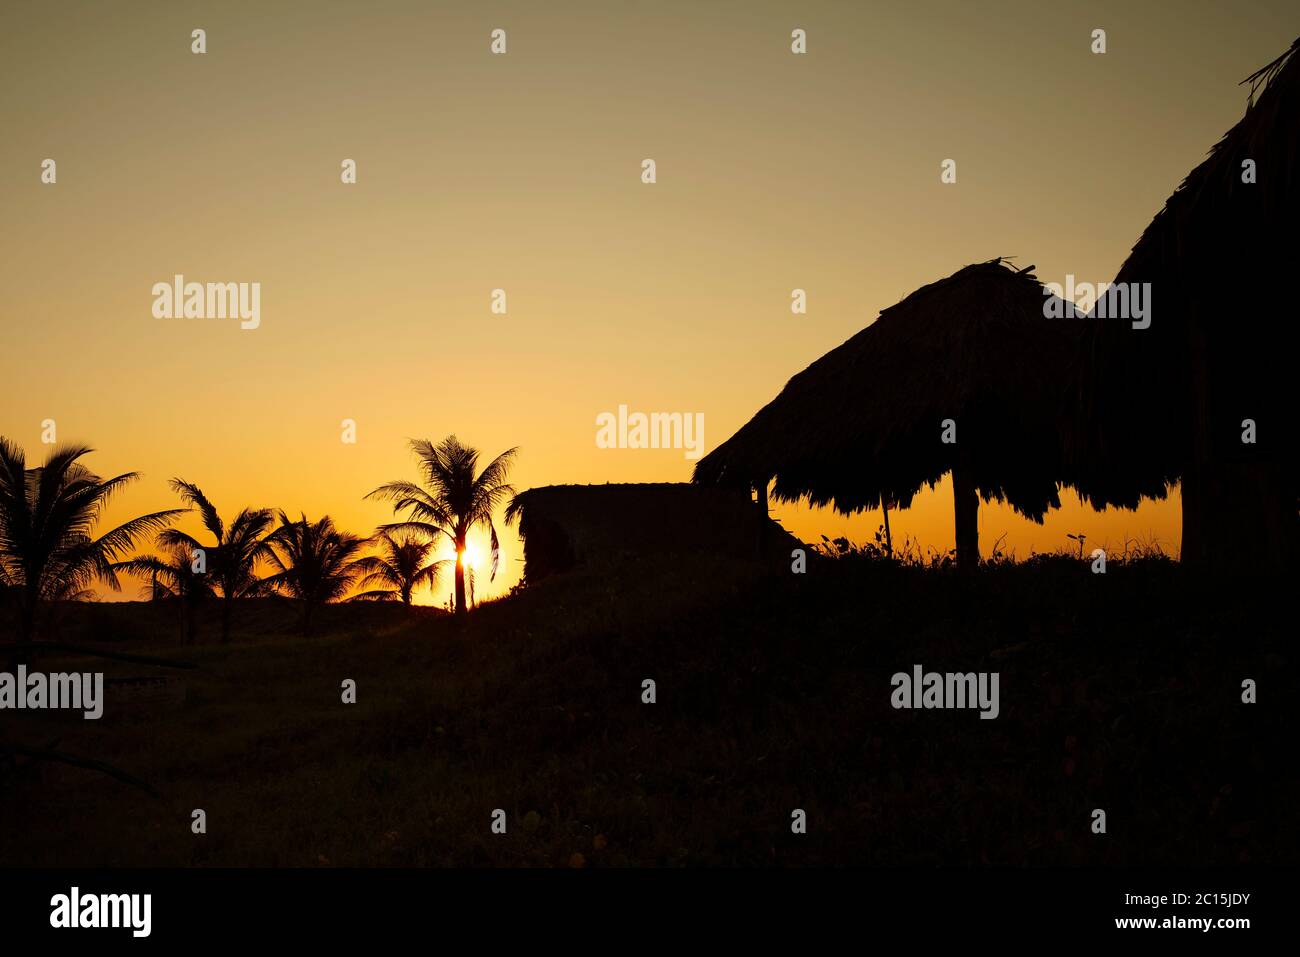 Silhouette of palms and thatched roof beach palapas during sunset. El Paredón, Guatemala Stock Photo